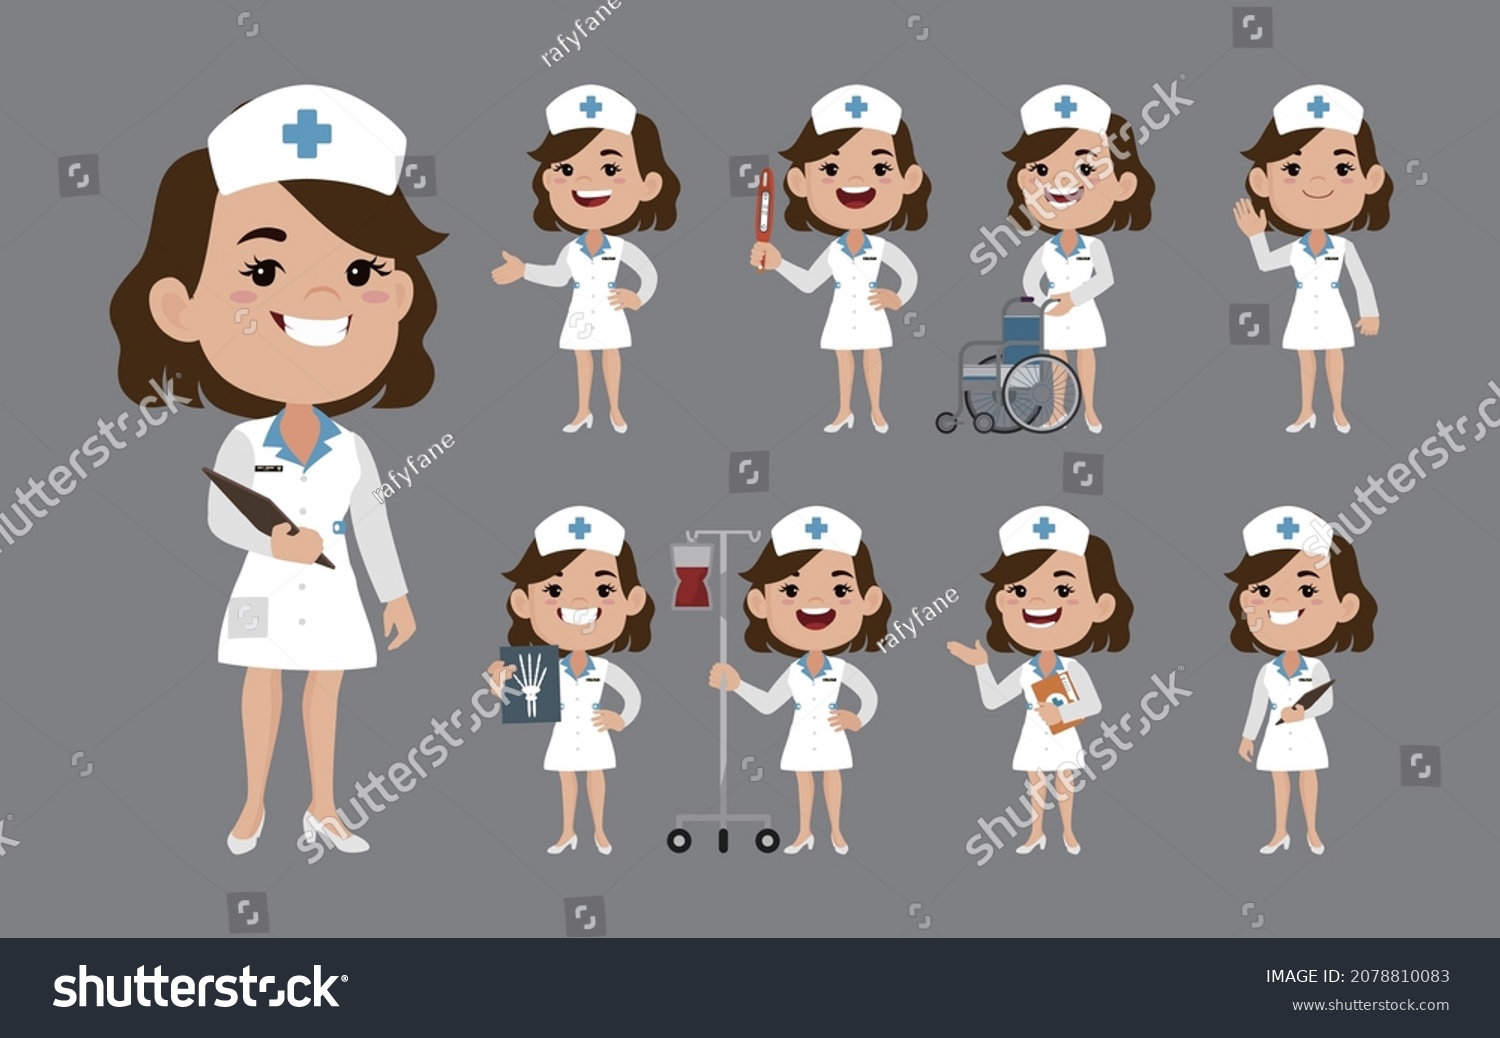 Nurse Different Poses Vector Stock Vector Royalty Free 2078810083 Shutterstock 3858